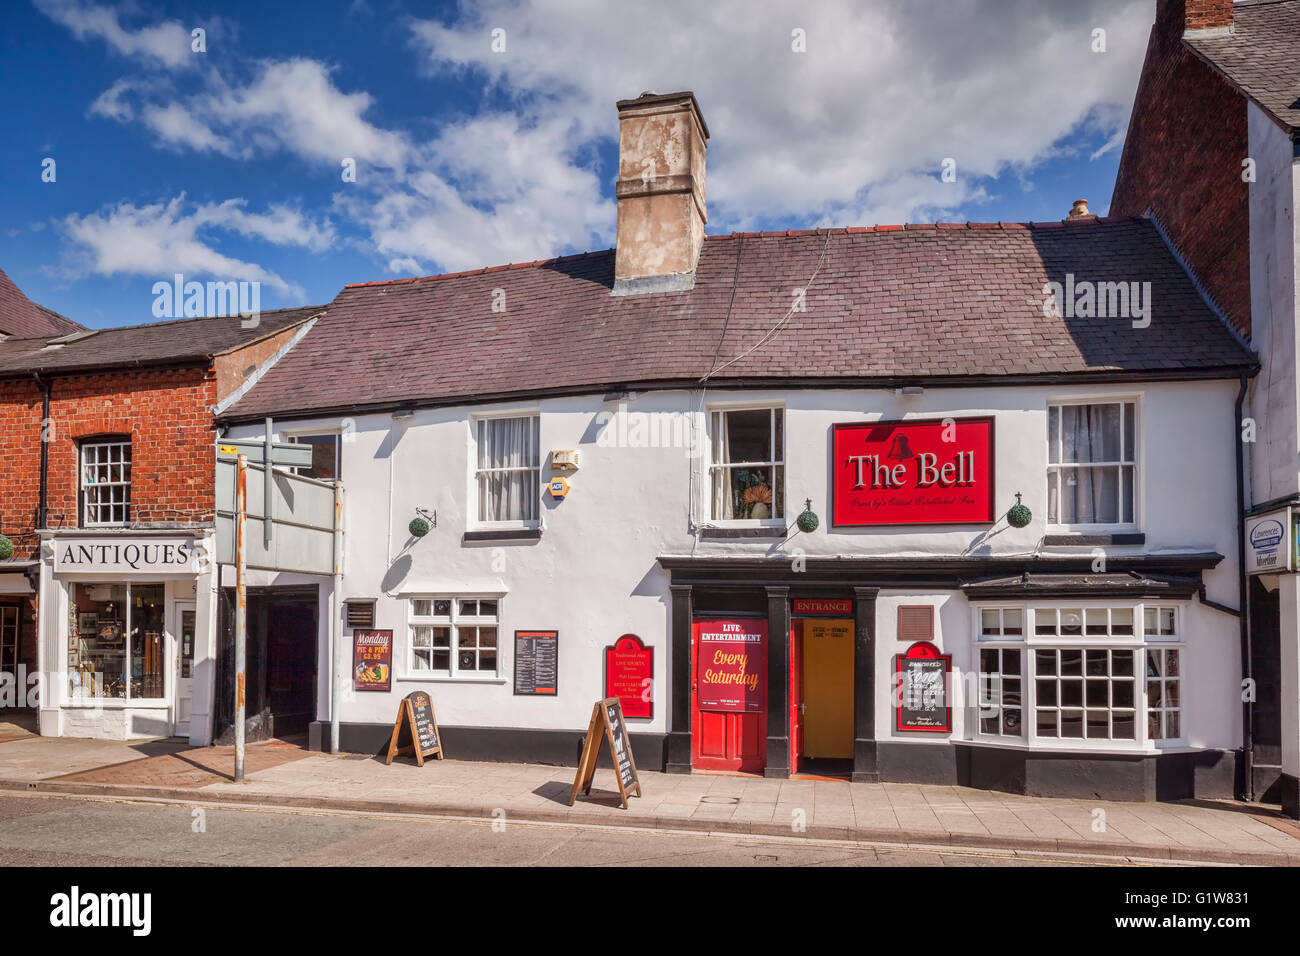 Oswestry is noted as a town with a great many public houses, The Bell is the Oldest established. Shropshire, England, UK Stock Photo